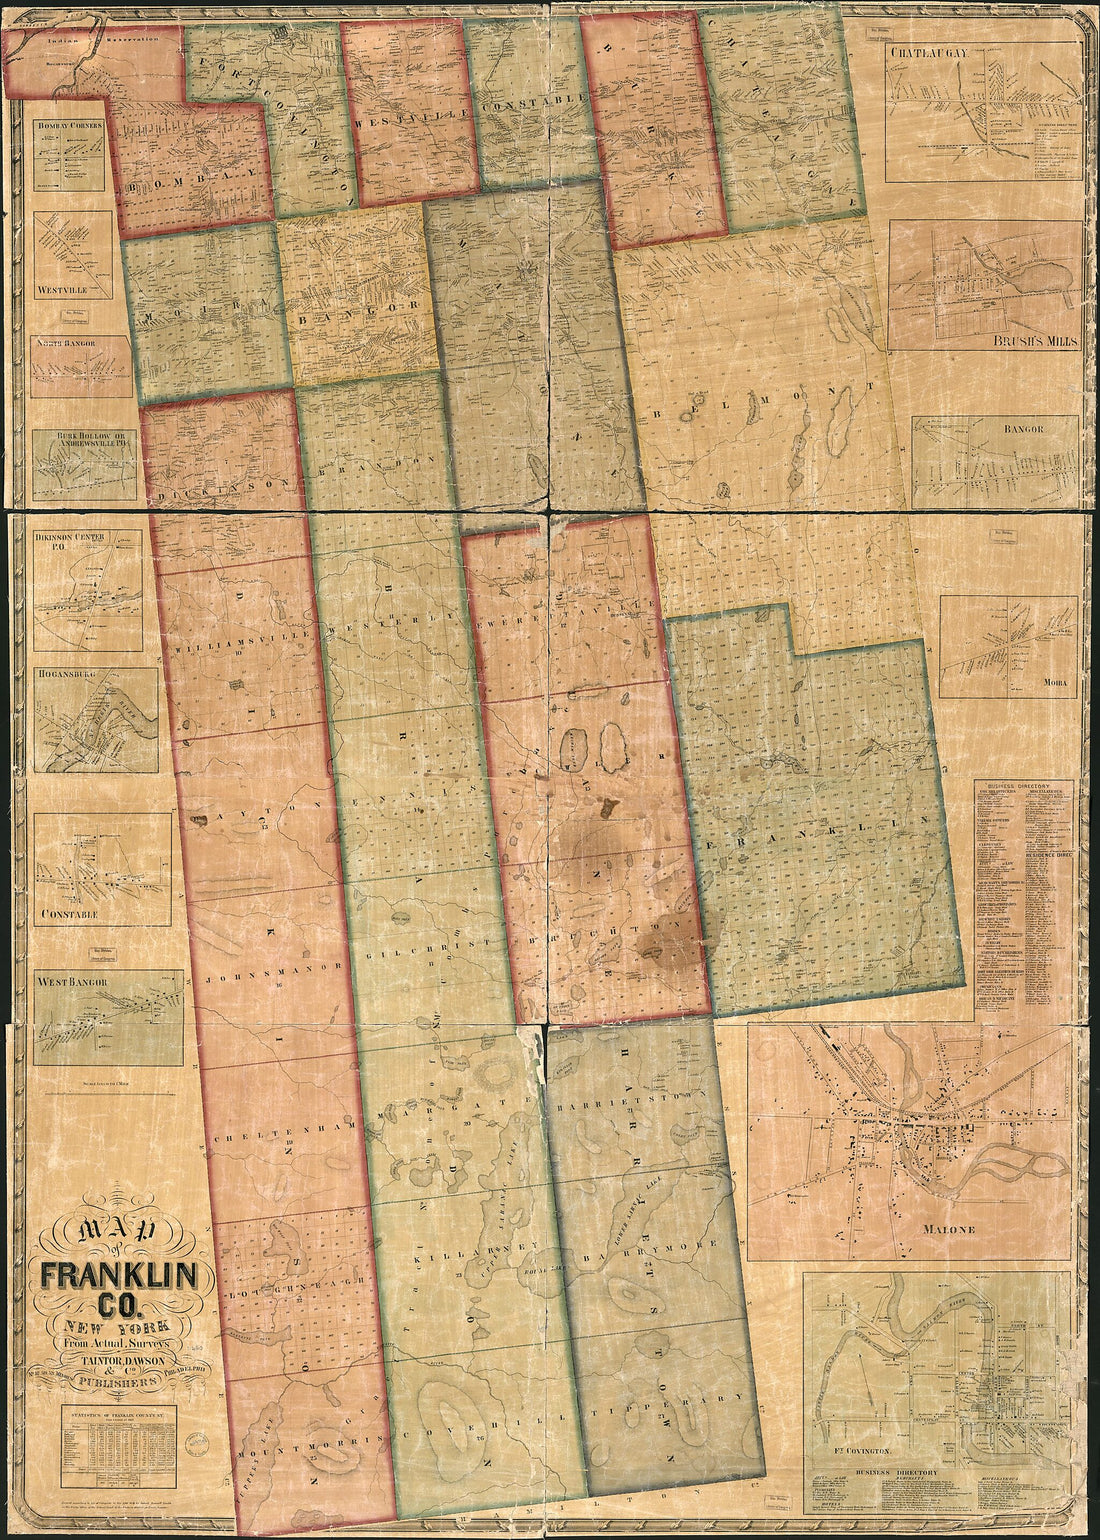 This old map of Map of Franklin County, New York : from Actual Surveys from 1858 was created by Robert Pearsall Smith, Dawson &amp; Co Taintor in 1858